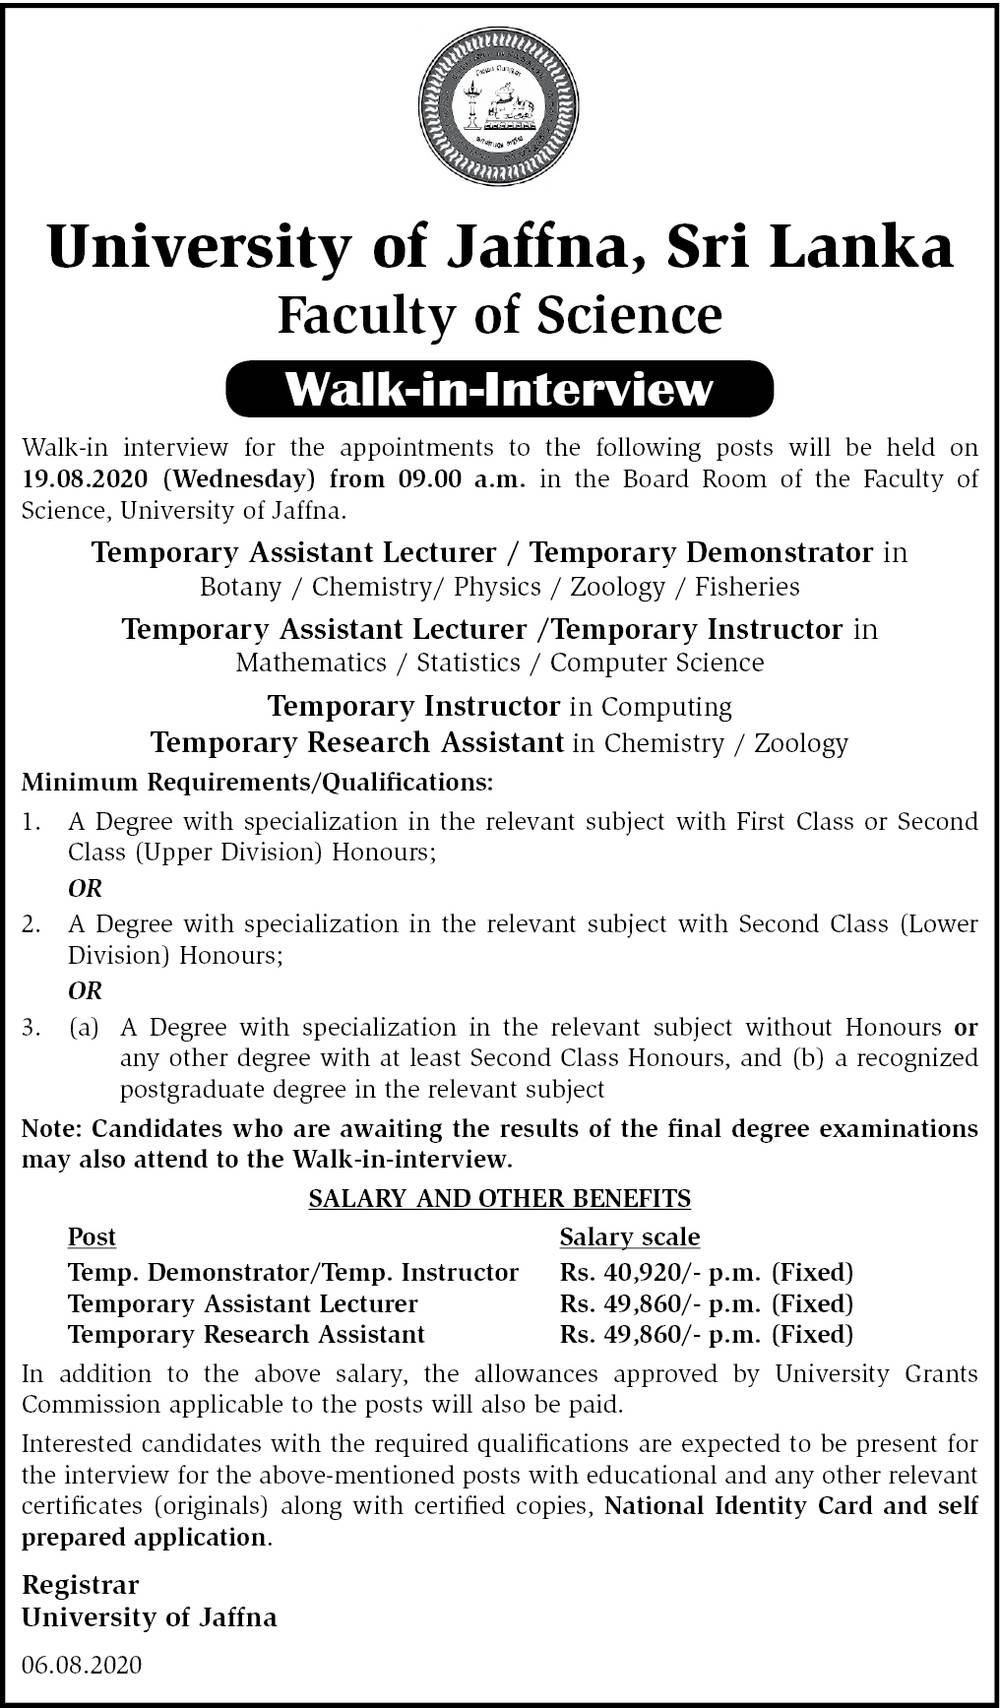 Temporary Assistant Lecturer, Temporary Demonstrator, Temporary Instructor, Temporary Research Assistant – Faculty of Science – University of Jaffna